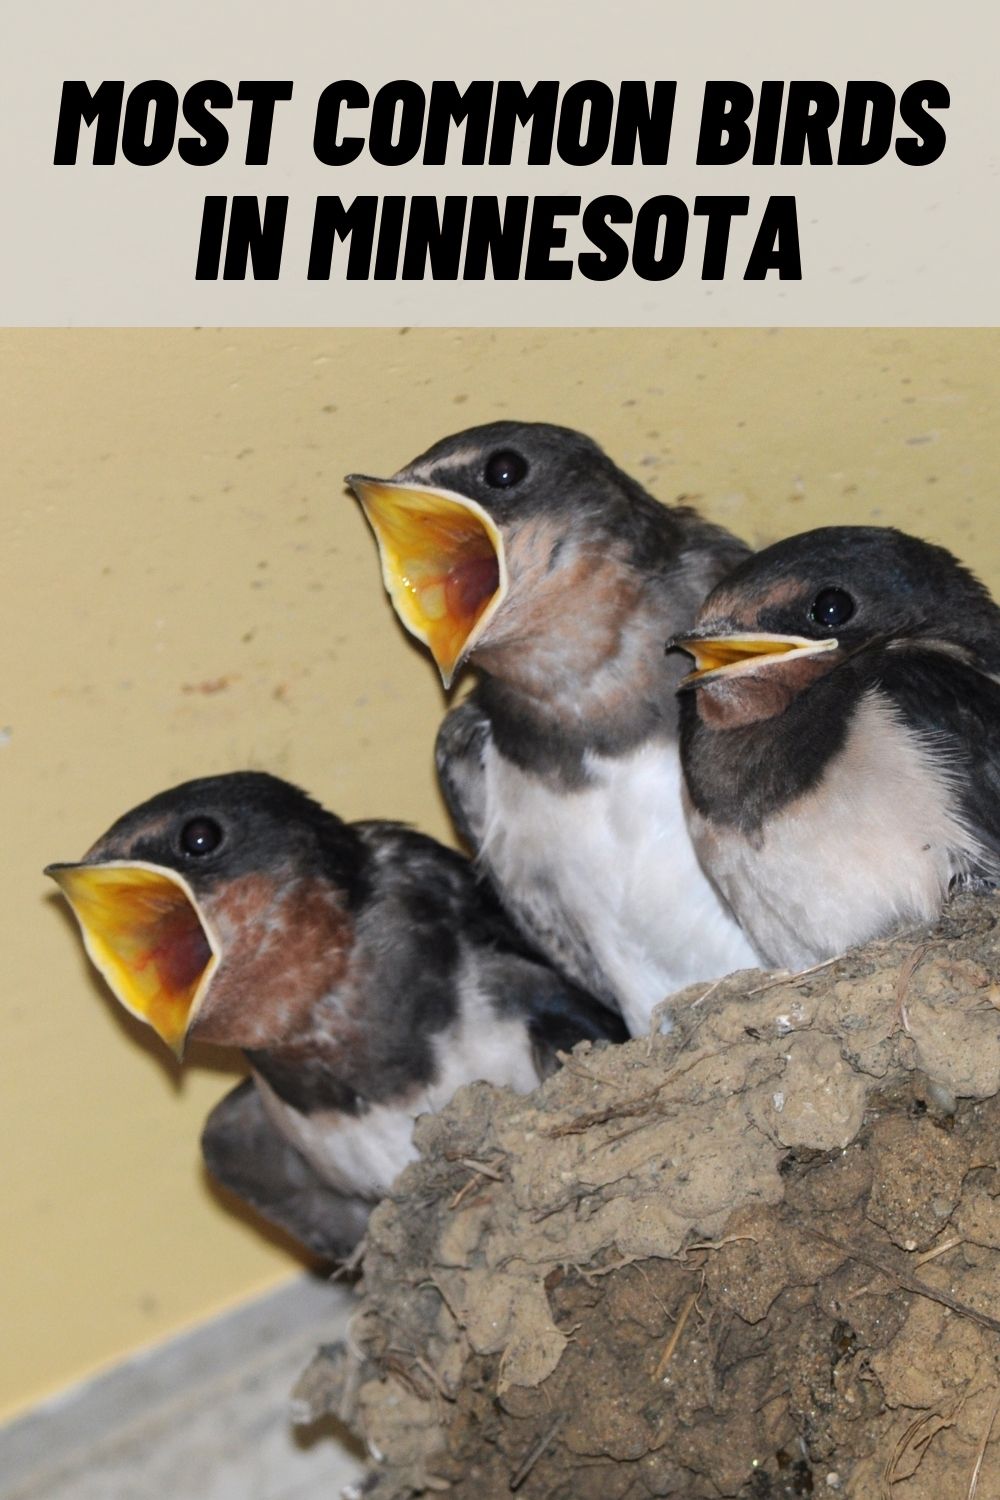 25 Most Common Birds in Minnesota (With Pictures)